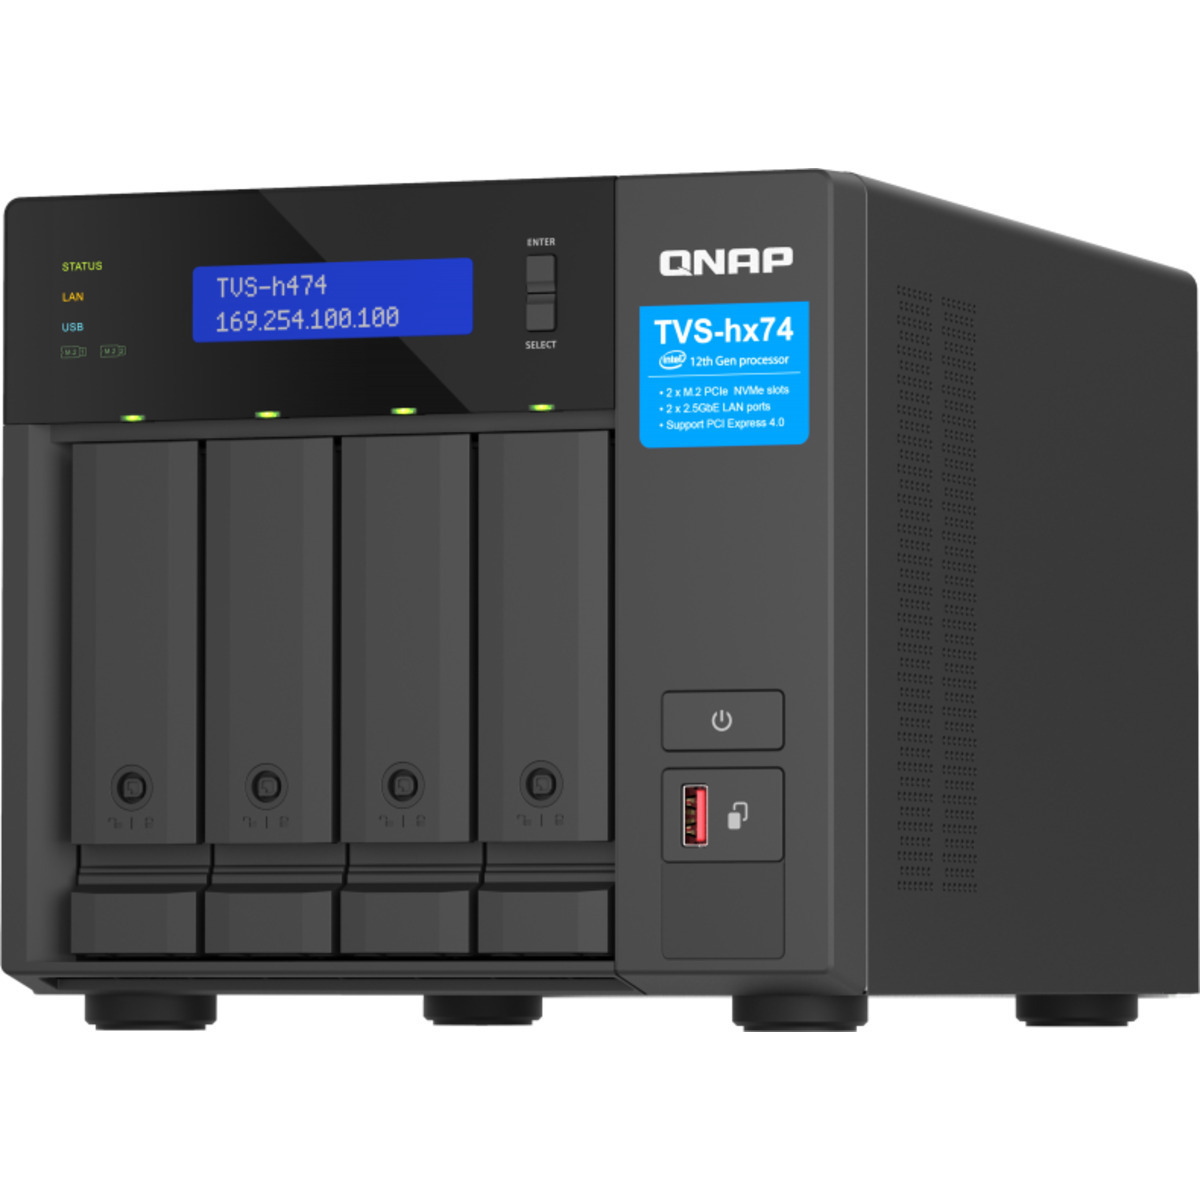 buy QNAP TVS-h474 Pentium Gold 88tb Desktop NAS - Network Attached Storage Device 4x22000gb Western Digital Ultrastar HC570 WUH722222ALE6L4 3.5 7200rpm SATA 6Gb/s HDD ENTERPRISE Class Drives Installed - Burn-In Tested - FREE RAM UPGRADE - nas headquarters buy network attached storage server device das new raid-5 free shipping usa spring sale TVS-h474 Pentium Gold